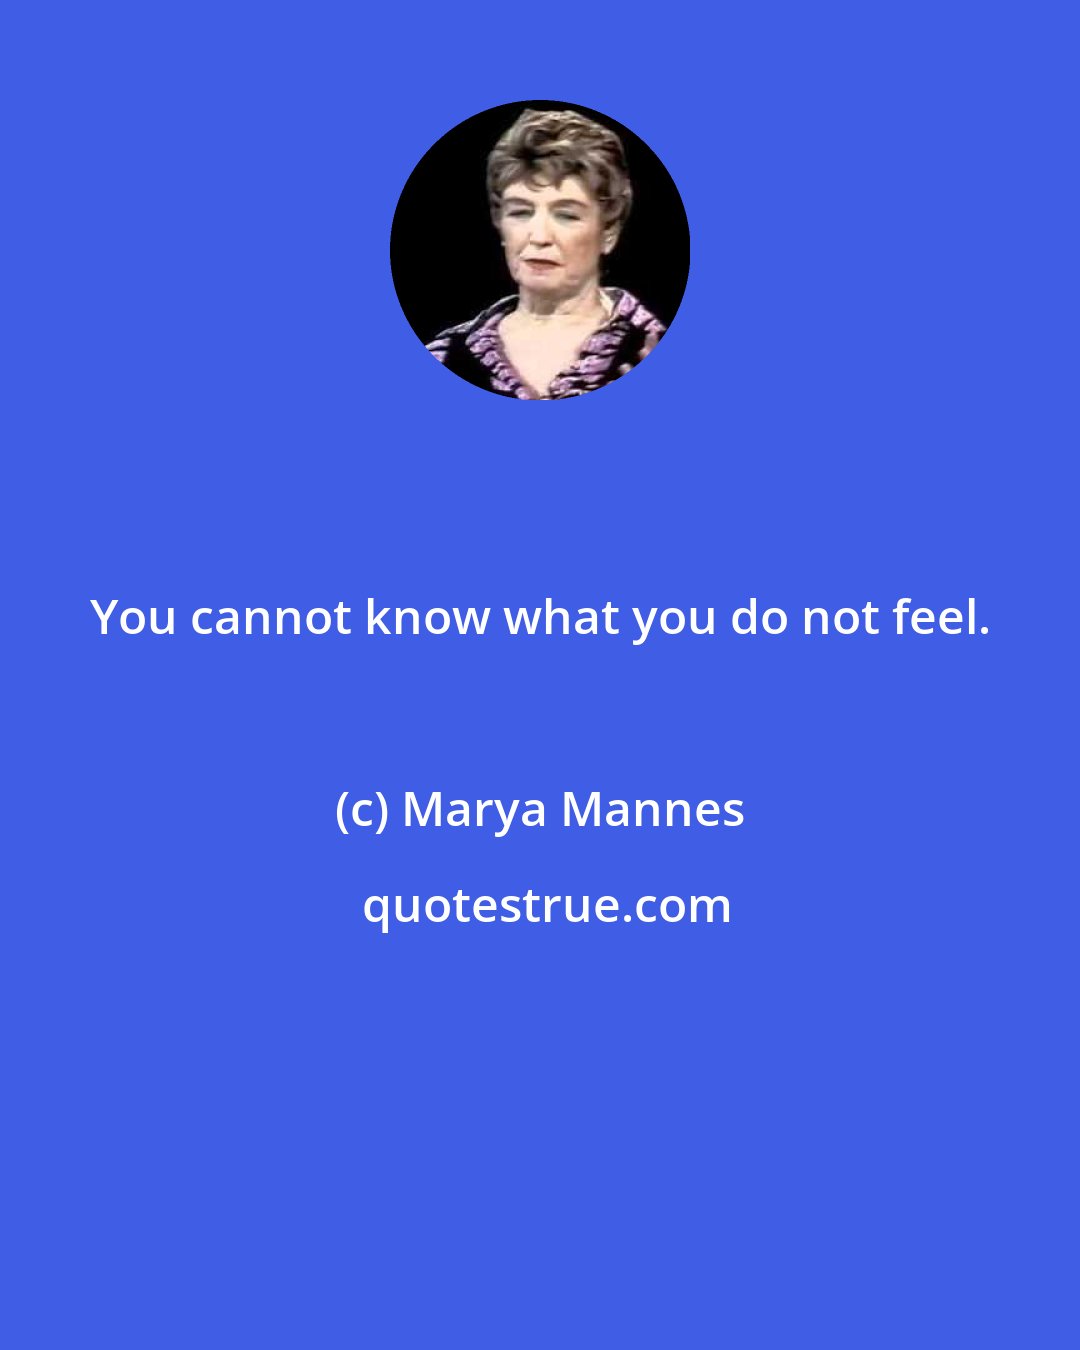 Marya Mannes: You cannot know what you do not feel.